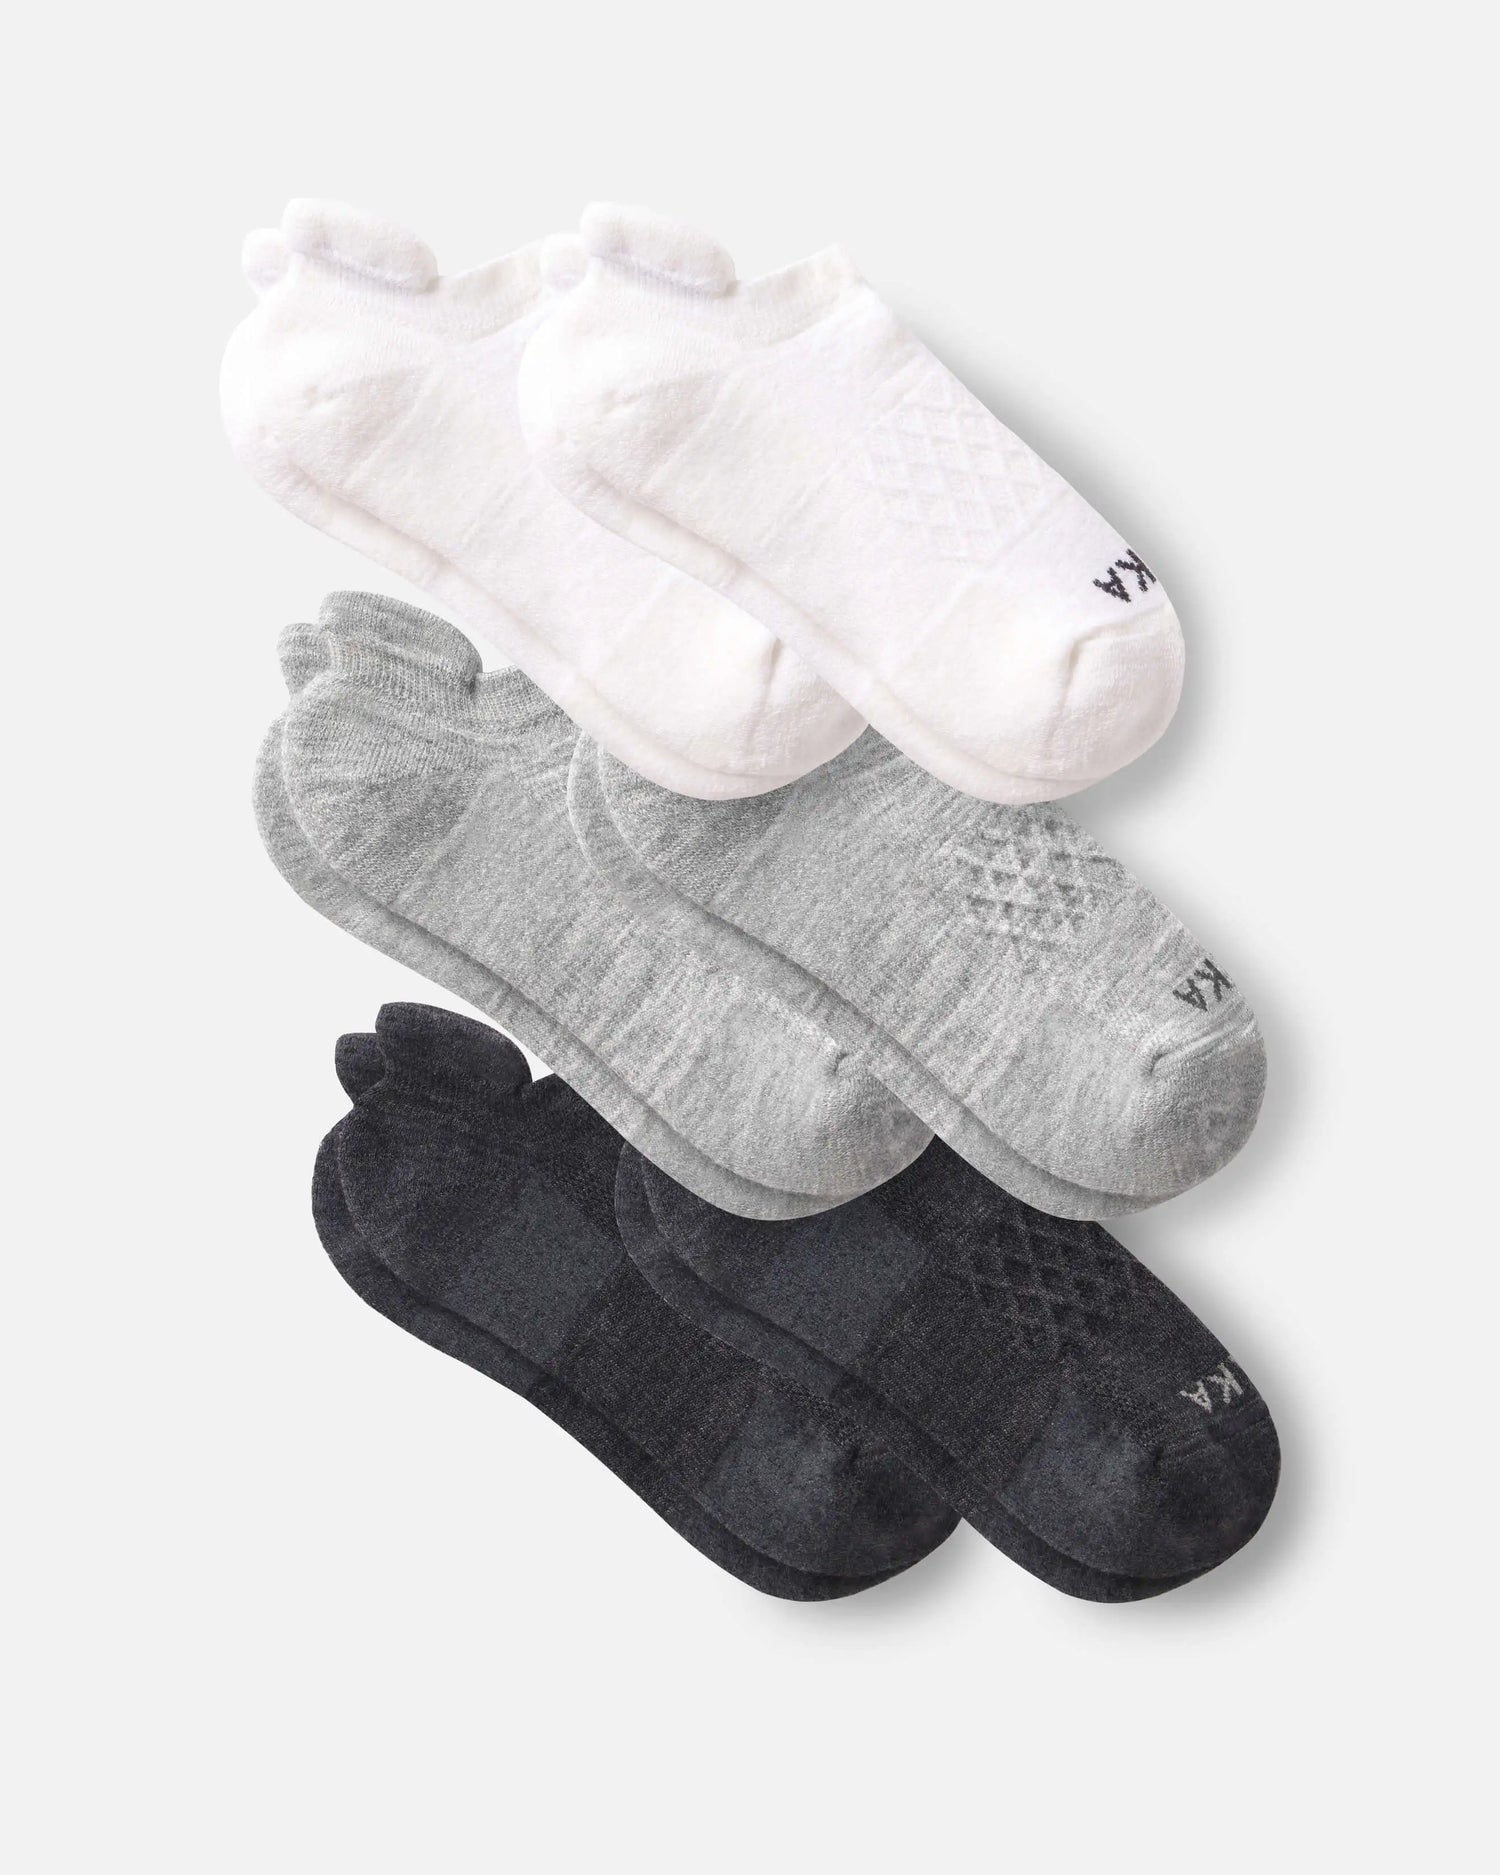 Hanes Comfort Fit Women's Mid Sport Invisible Liner Socks, 6-Pairs